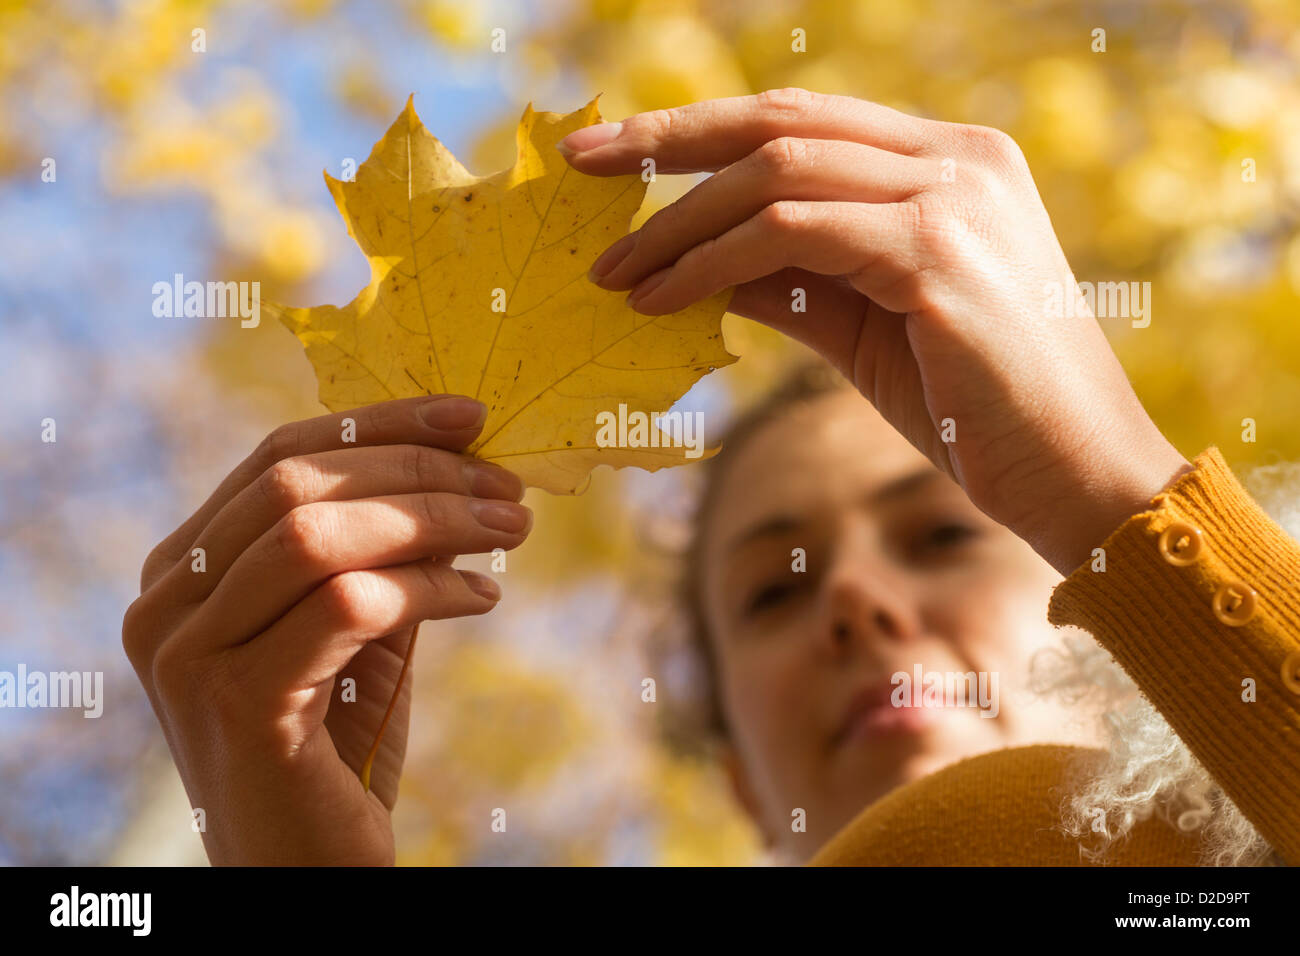 A woman examining an autumn leaf, low angle close-up of hands Stock Photo